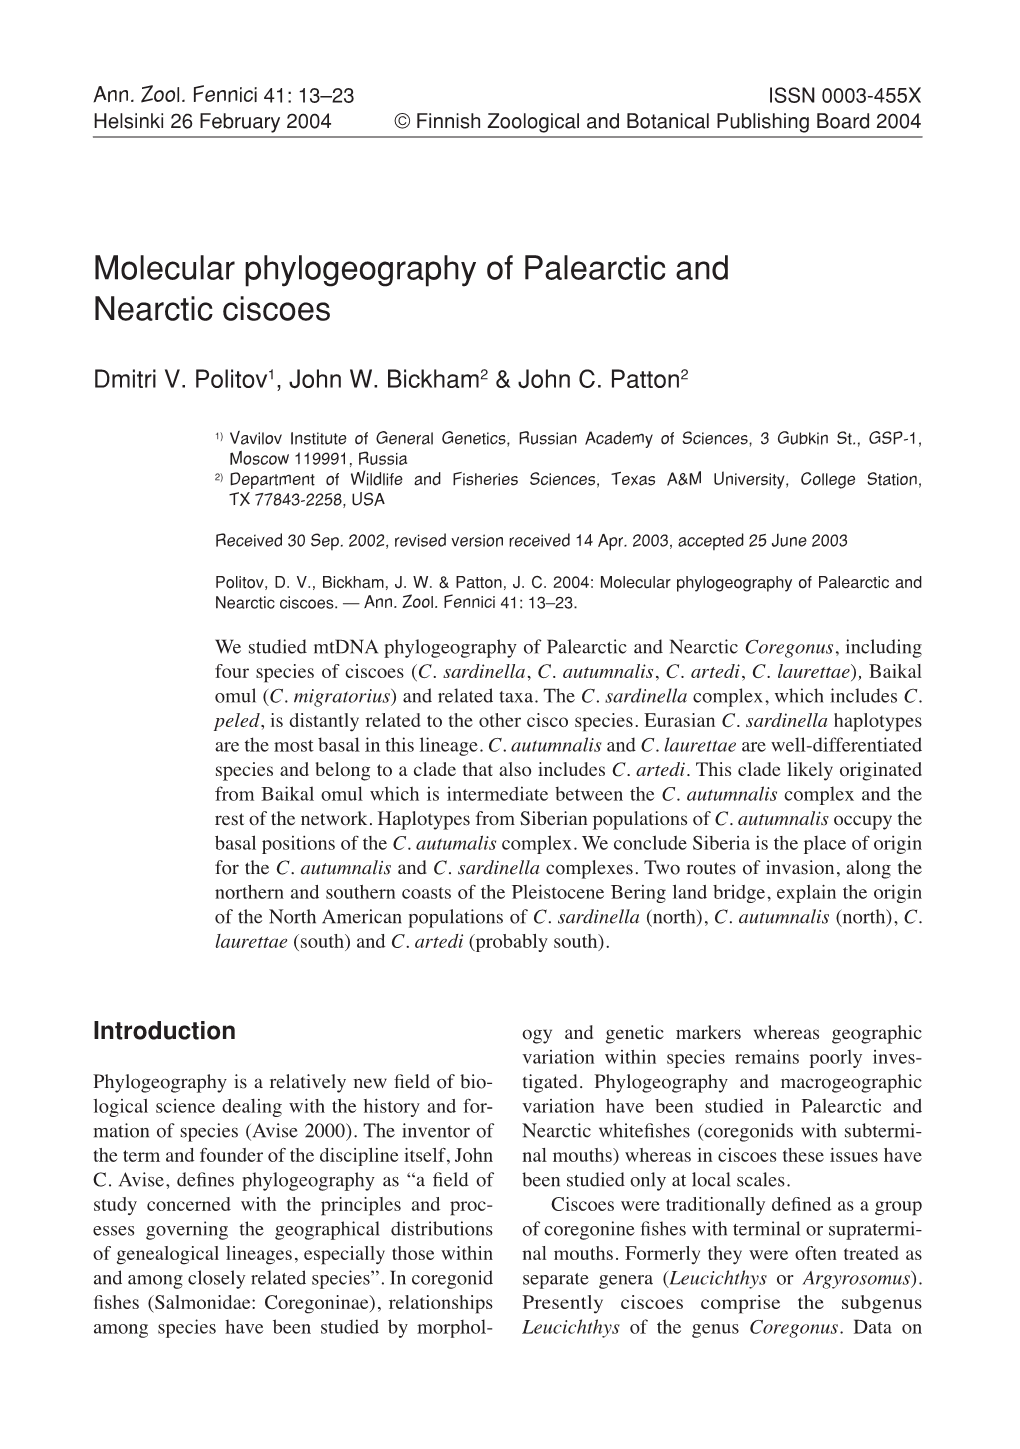 Molecular Phylogeography of Palearctic and Nearctic Ciscoes